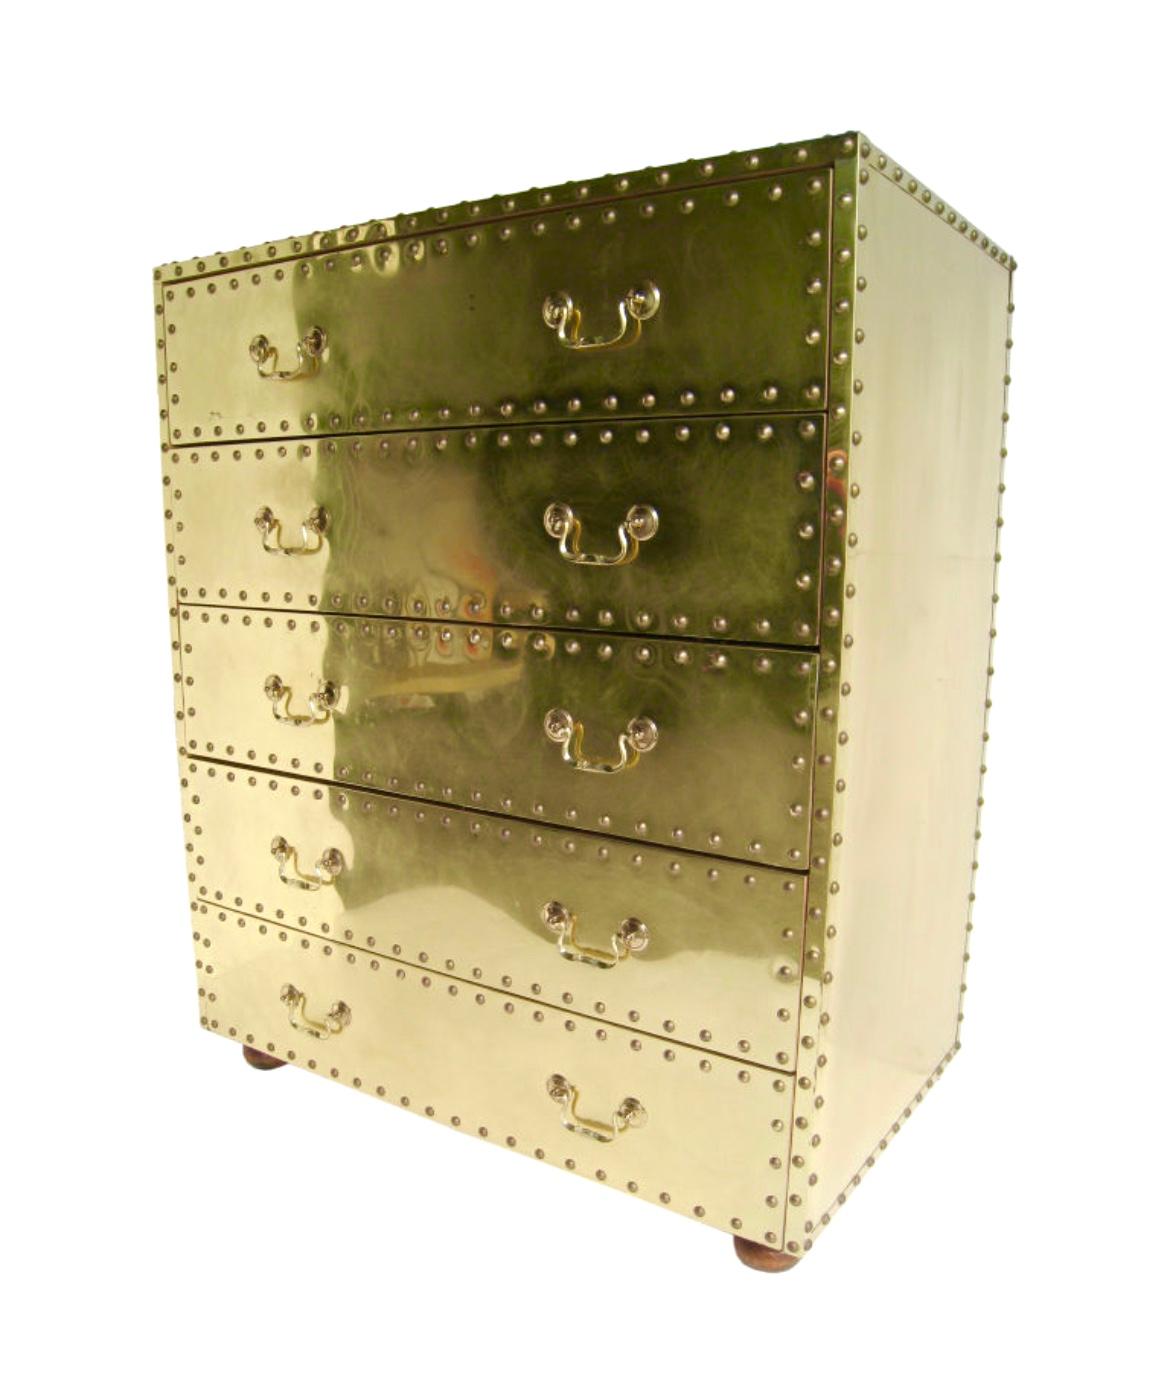 Glamorous vintage brass dresser made in Spain by Spanish Design House, Sarreid Ltd. Made of wood and clad in brass with nailhead trim. This dresser has five large drawers and rests on four bun feet made of wood. There are no deep scratches or dents.